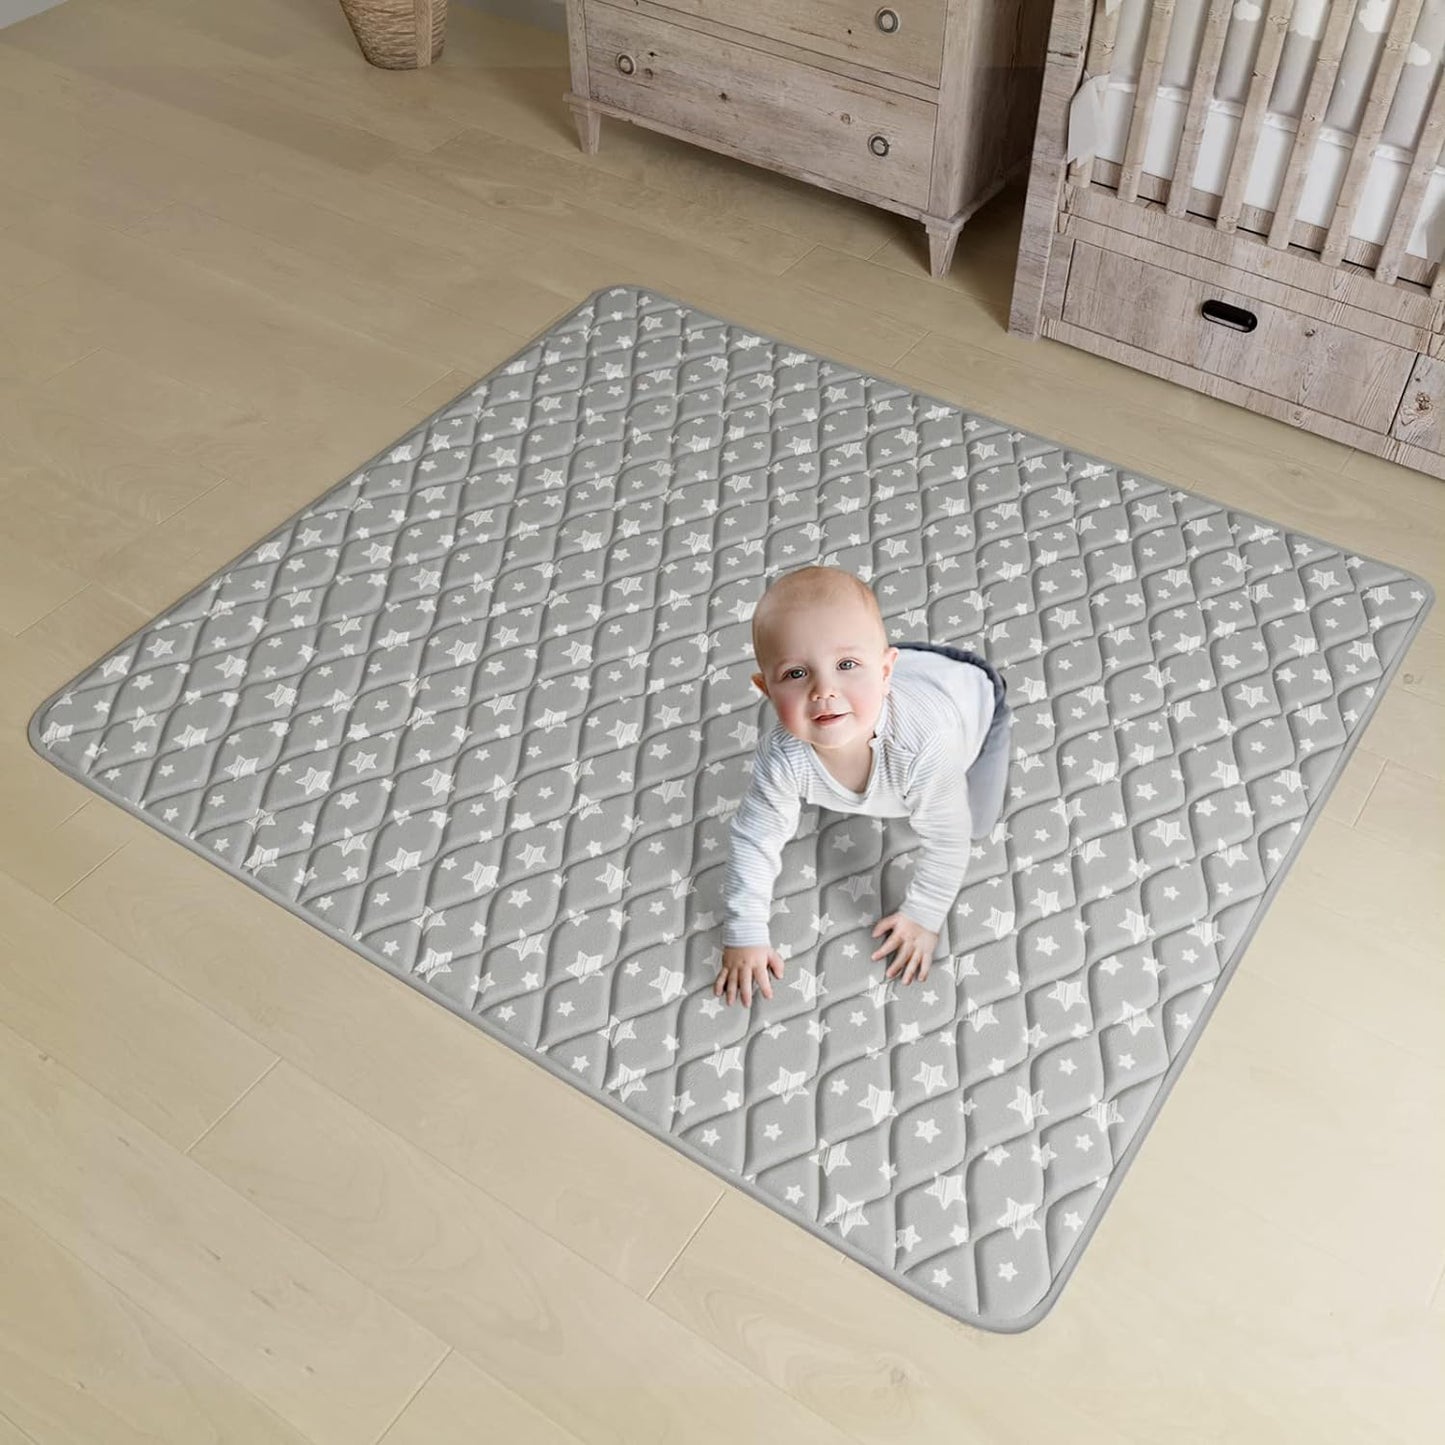 Premium Foam Baby Play Mat | Playpen Mat - Square 59" x 59", Thicker and Non-Toxic Crawling Mat for Infant & Toddler, Grey Star